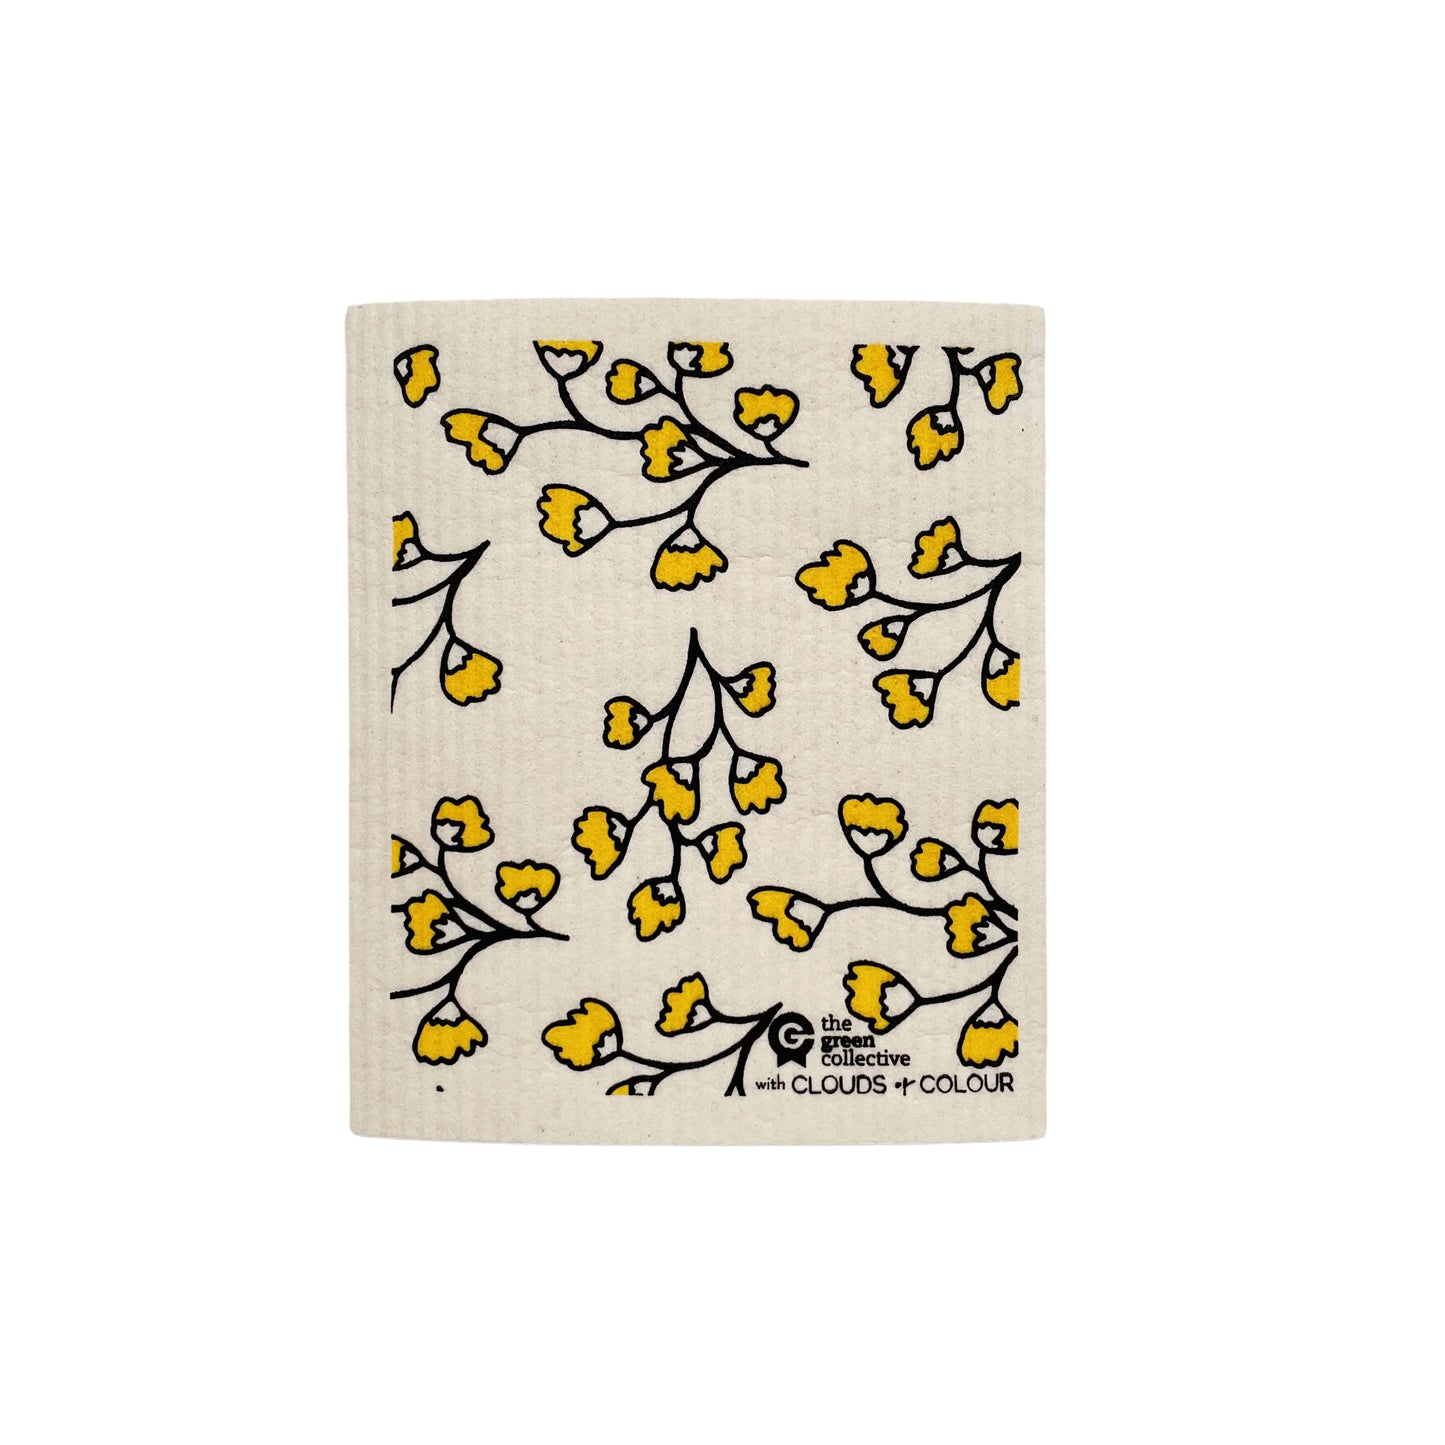 Swedish Dishcloth SPRUCE - Mustard Flower by Clouds of Colour